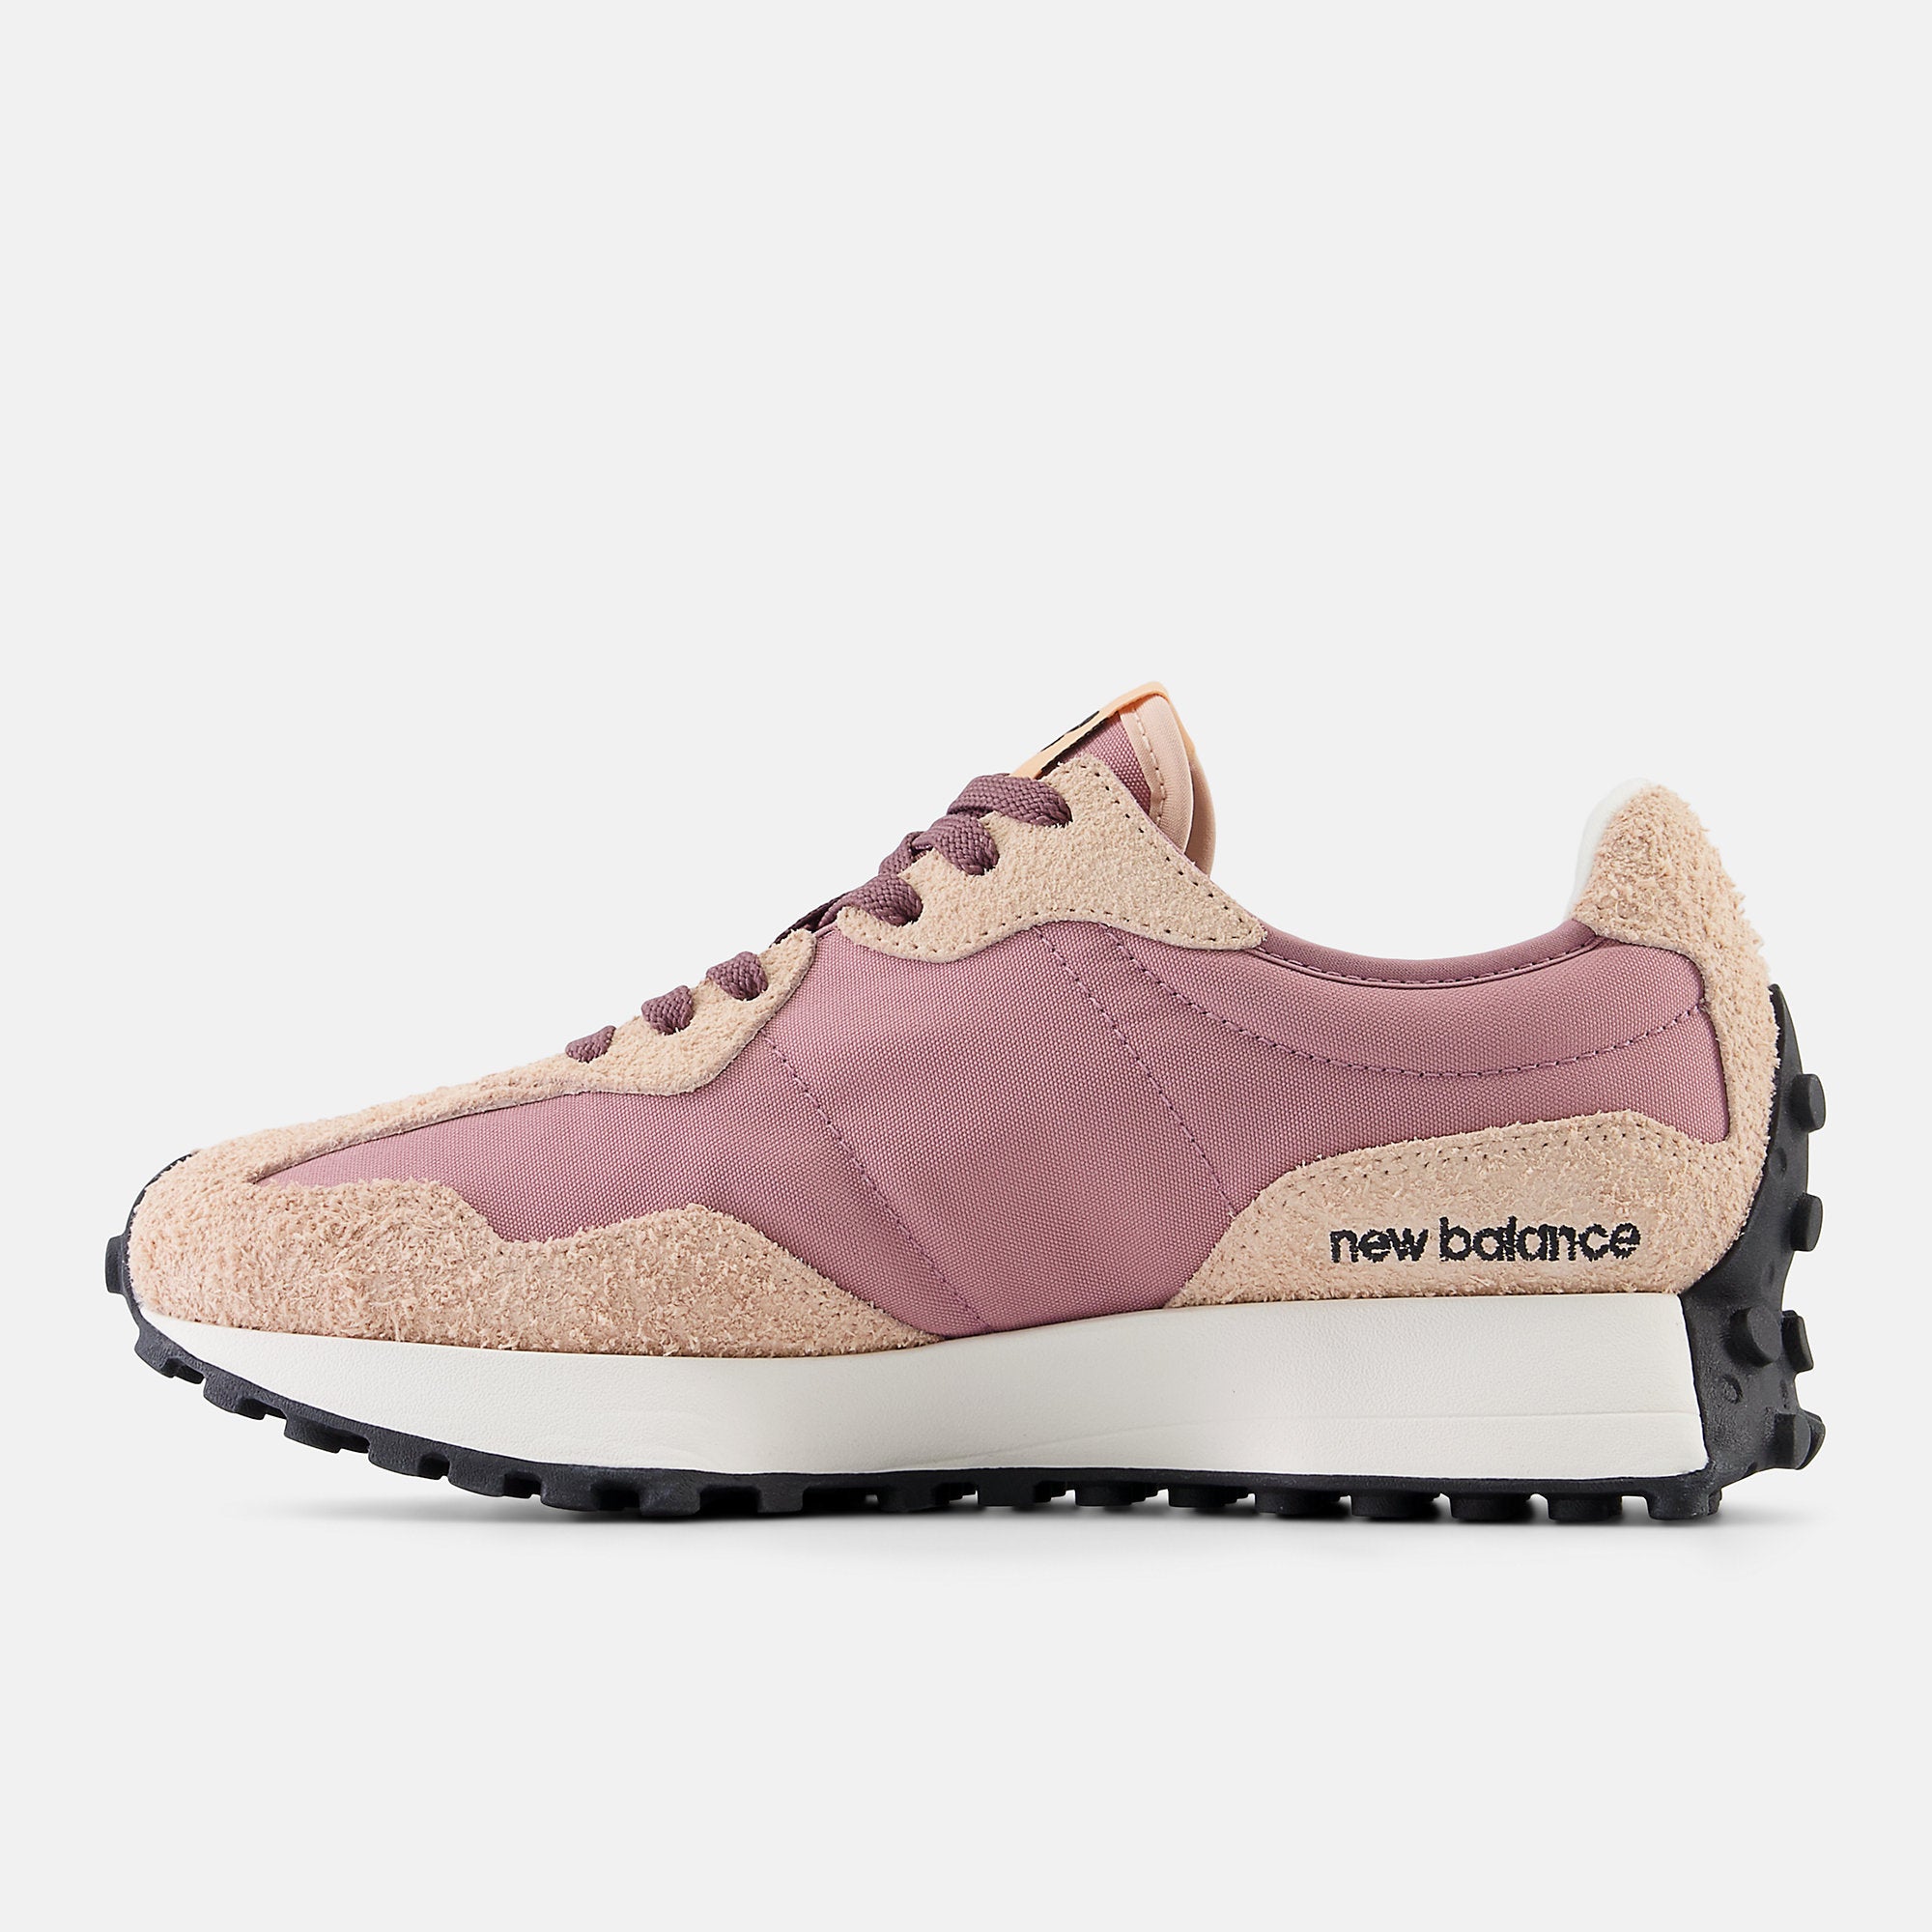 New Balance Womens 327 Fashion Trainers - Pink / Coral